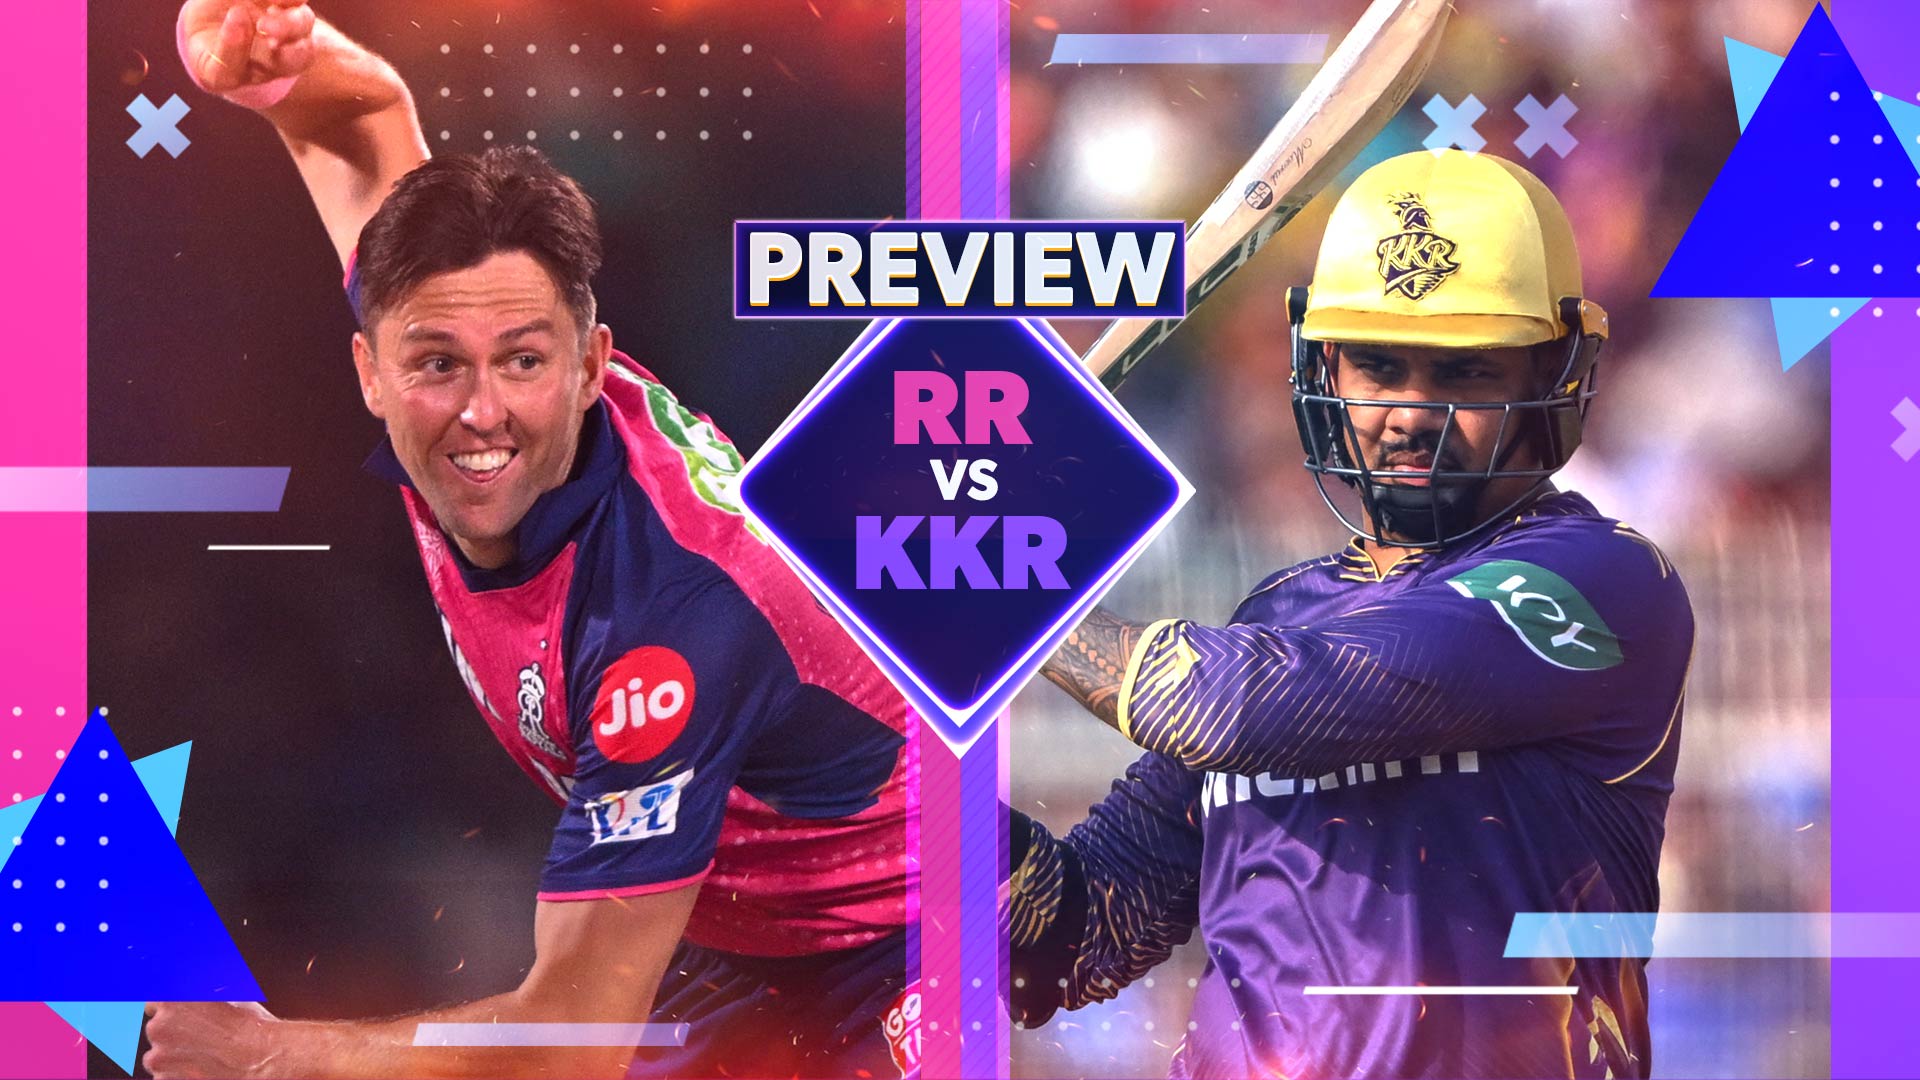 RR vs KKR: All You Need to Know